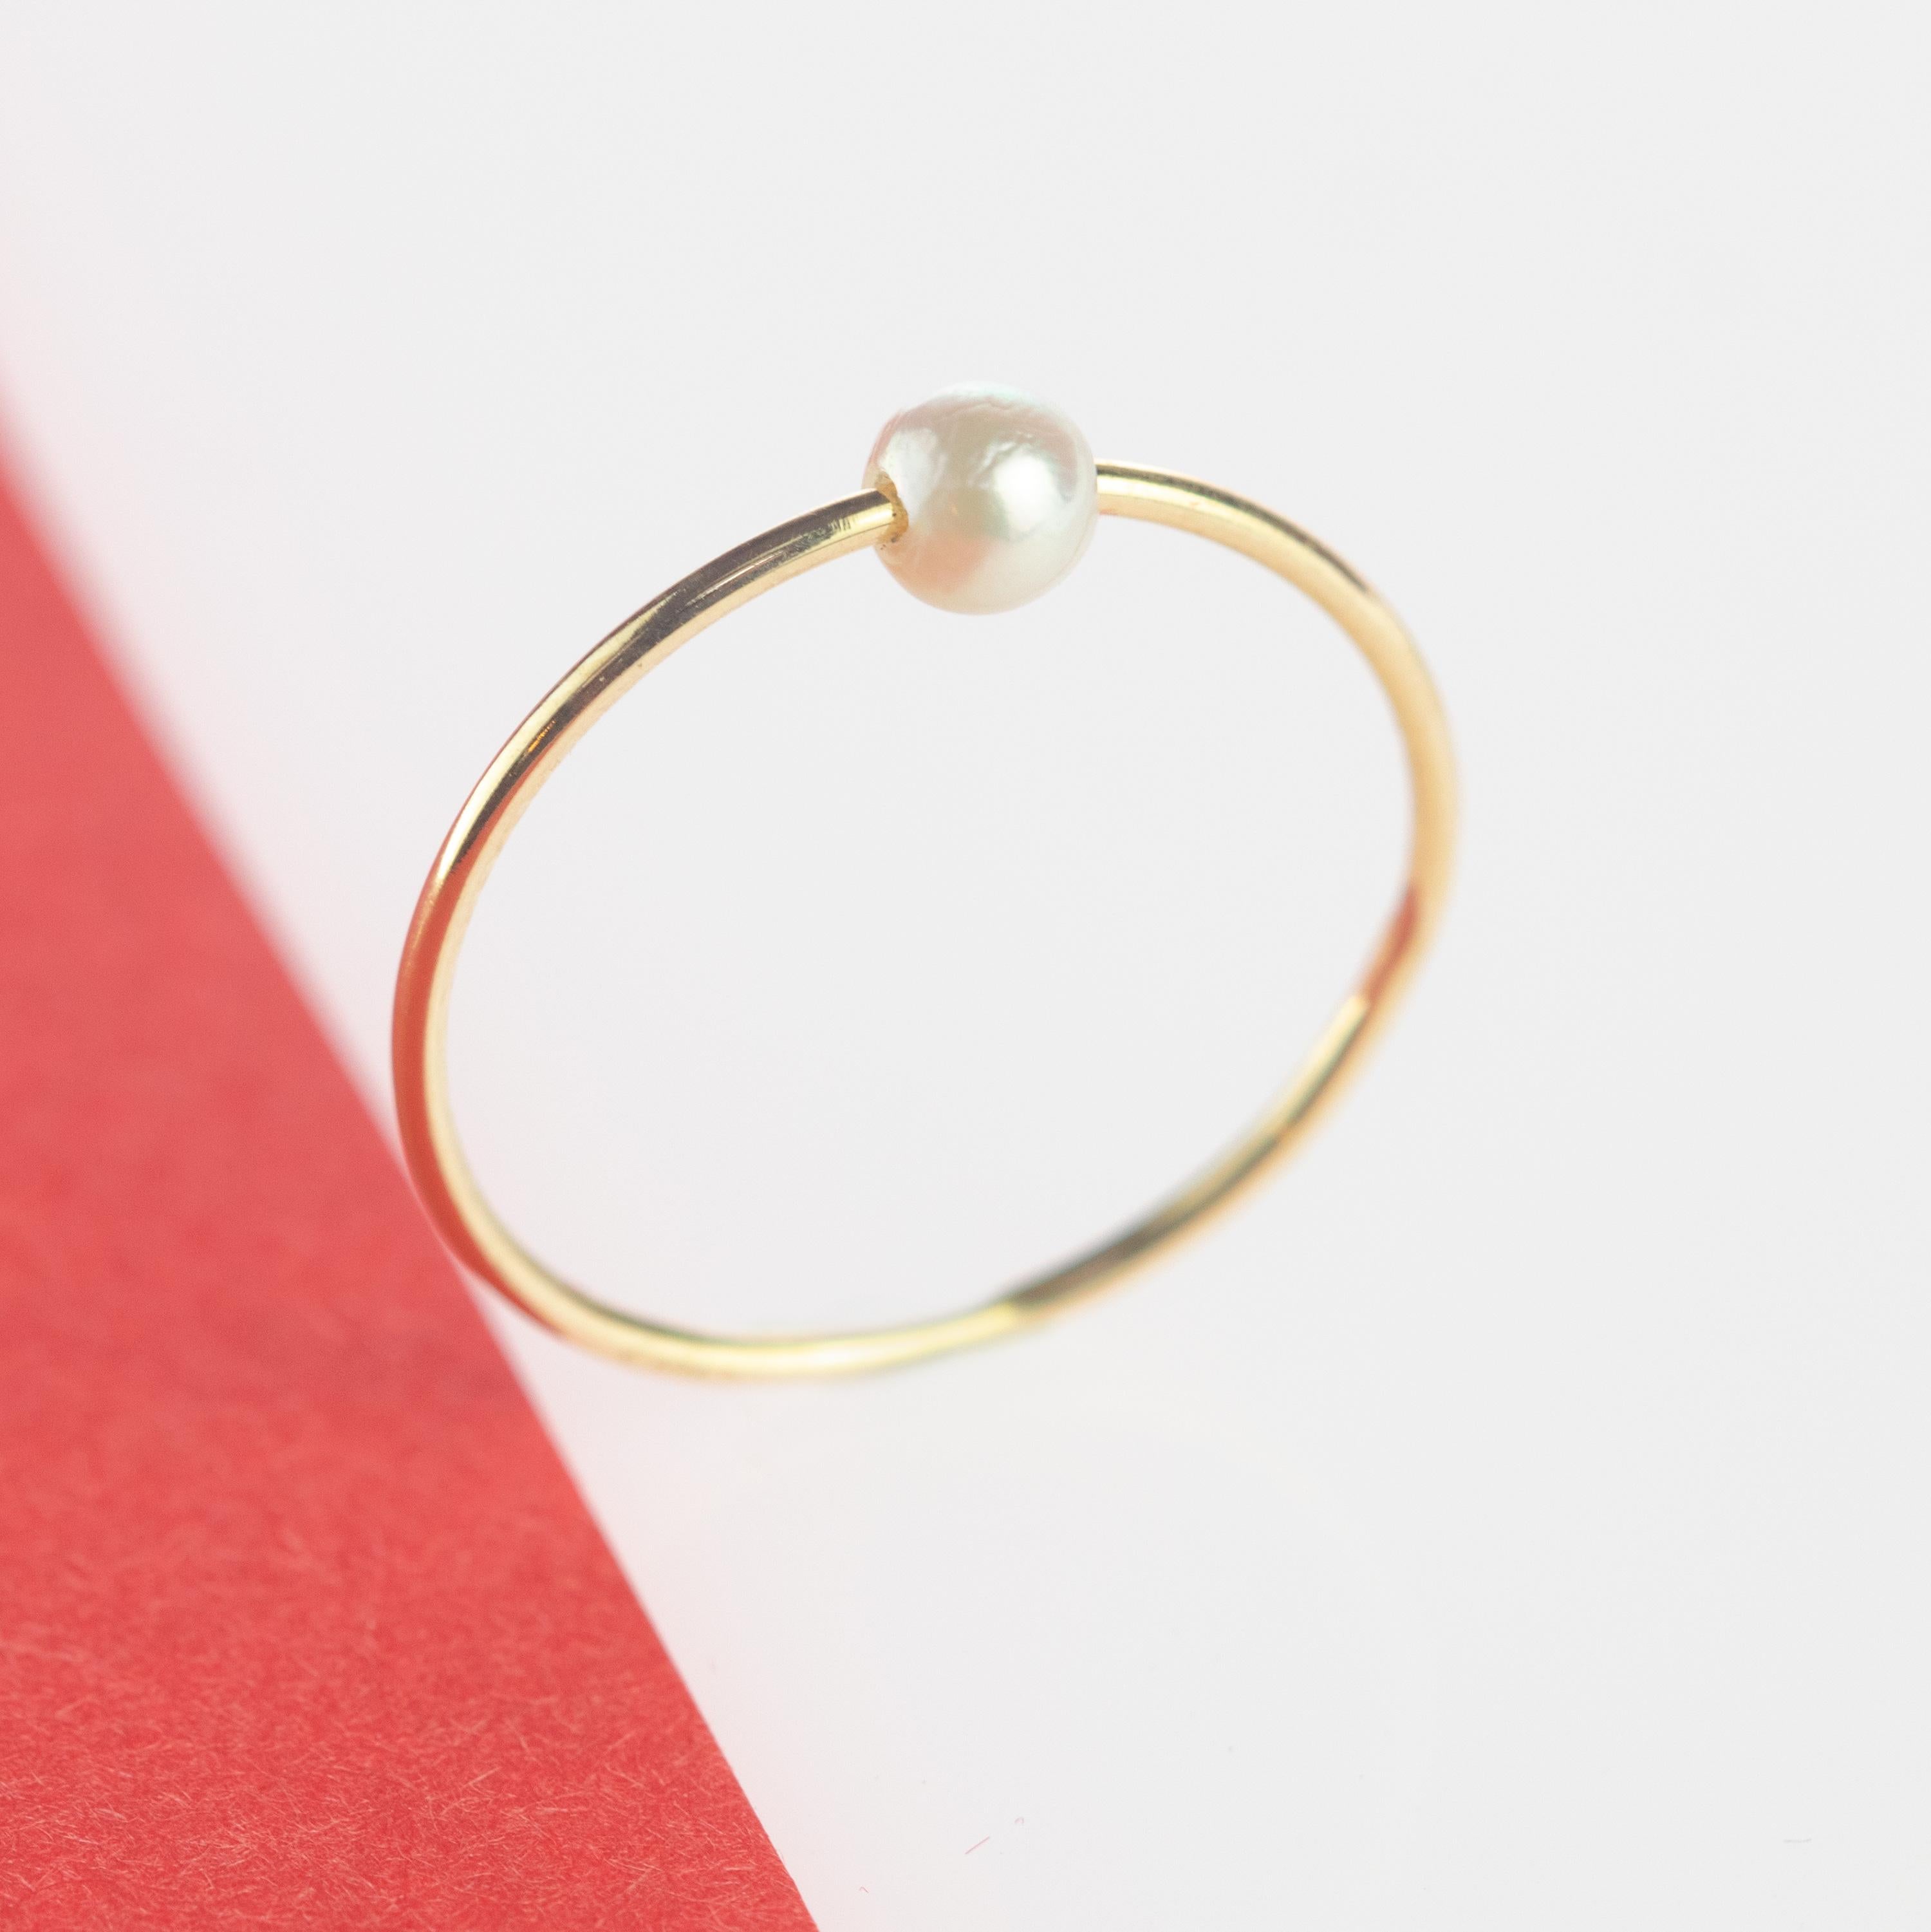 Signature INTINI Jewels Moon band planet ring. Contemporary ring design in 9 karat yellow gold with a precious round Freshwater Pearl .  Design and color mixed in one jewel. Delight yourself with a strong, minimalist design, just for a stunning chic